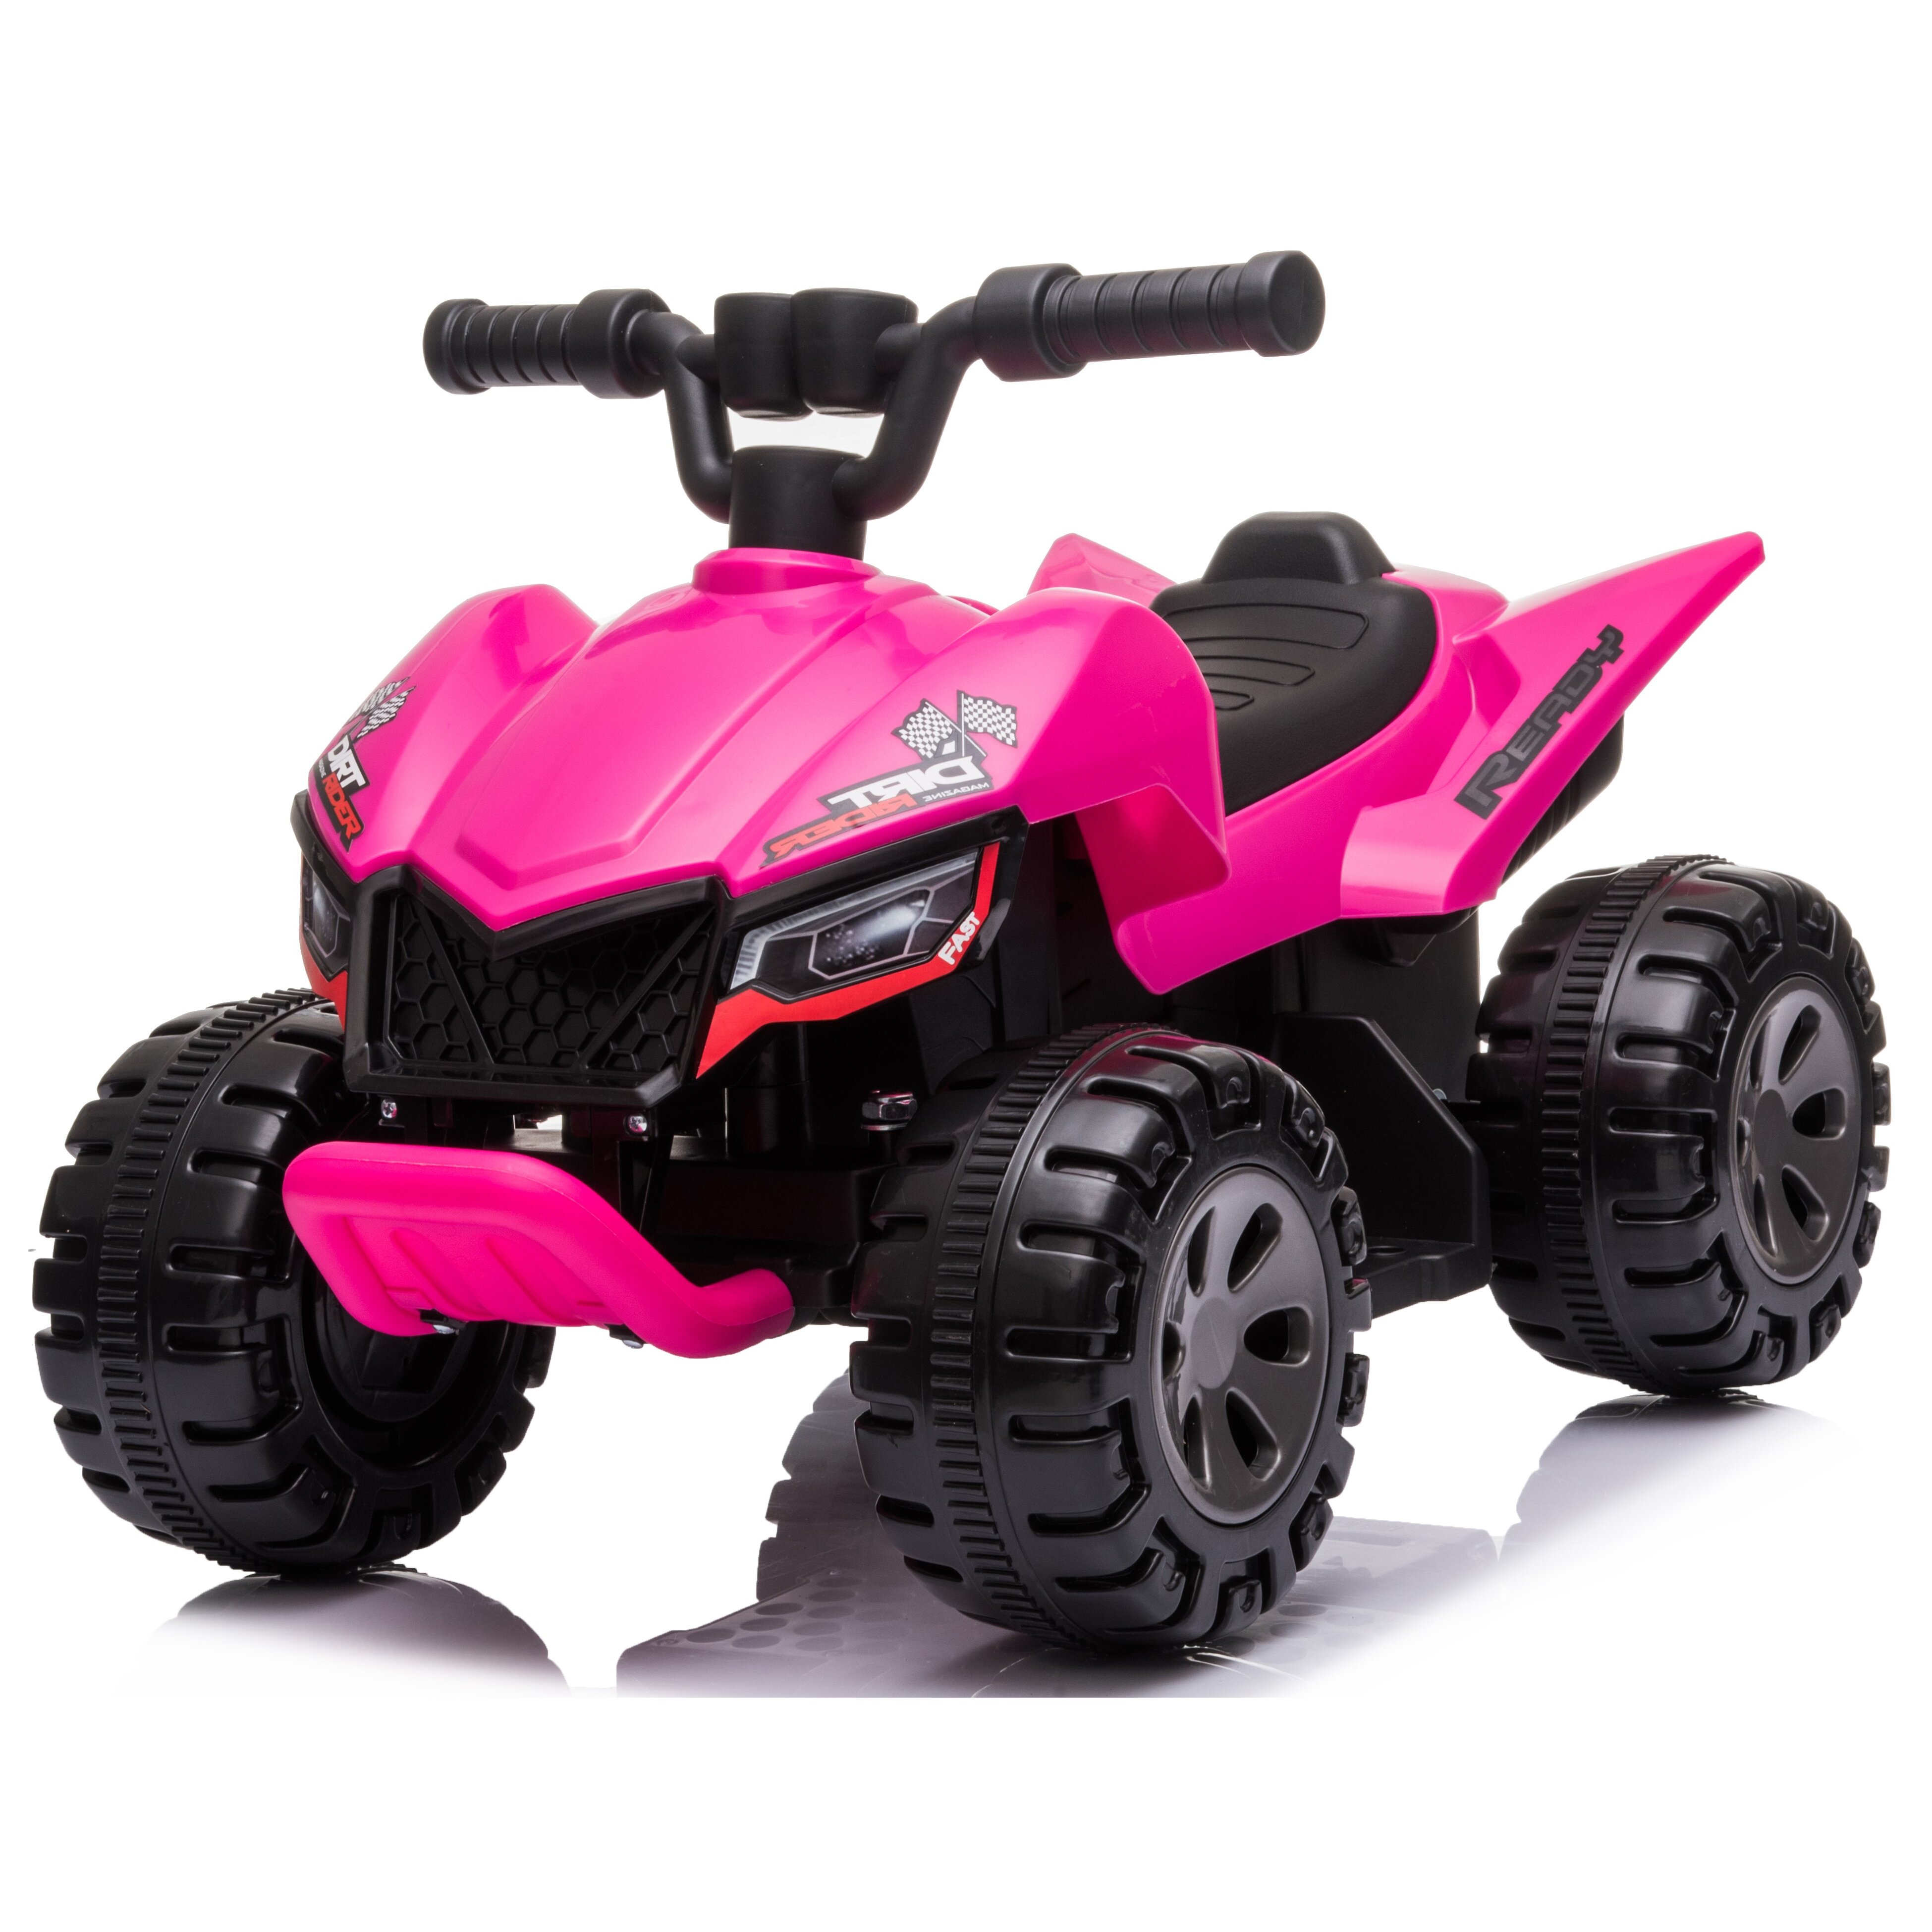 Epic Play My First Little 6v Ride on Quad Bike - Pink / Black